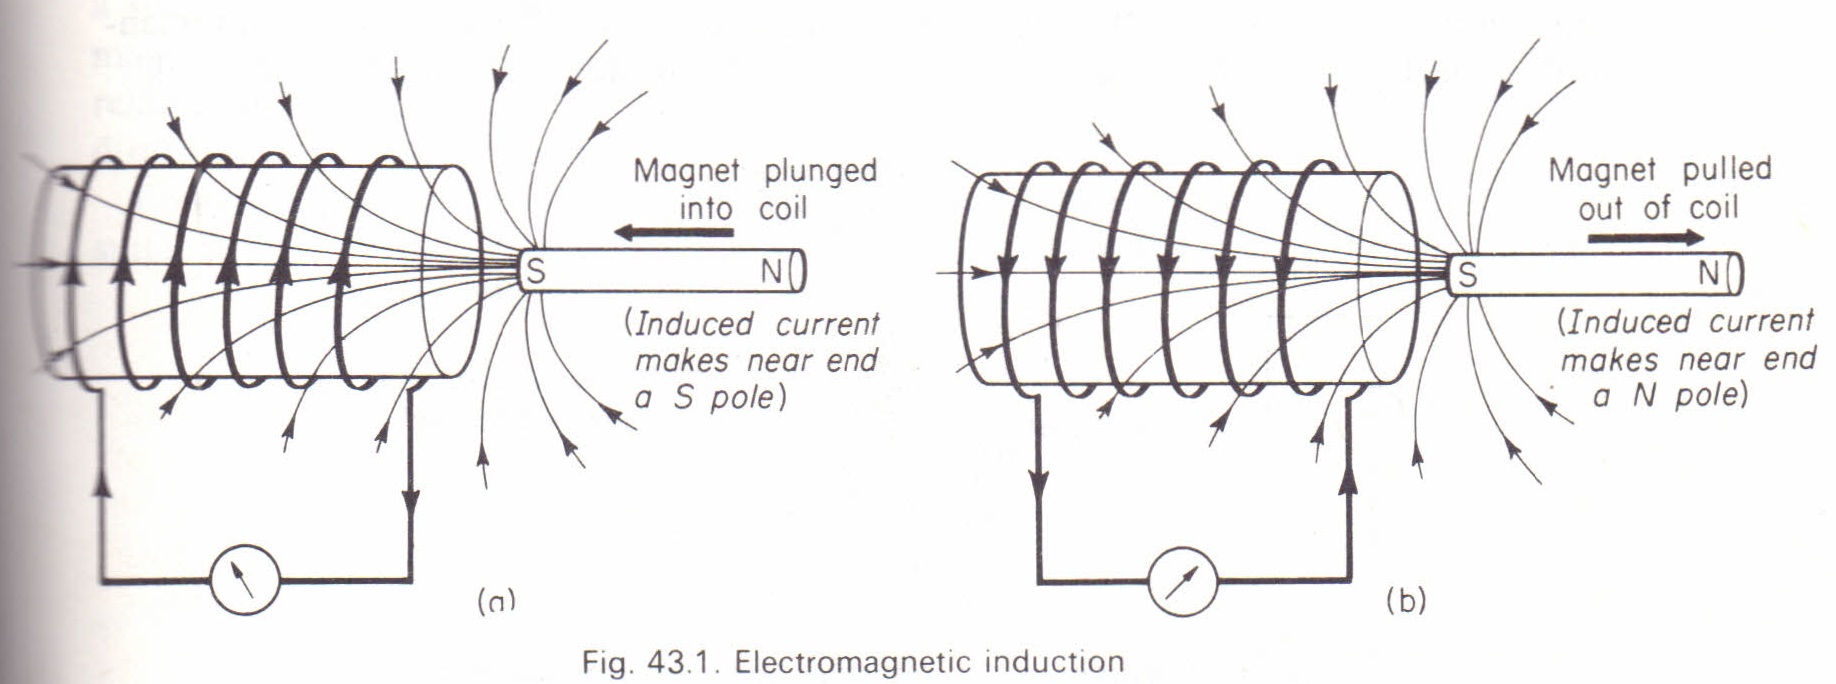 Electromagnetic Induction / Faraday's Law of Electromagnetic Induction